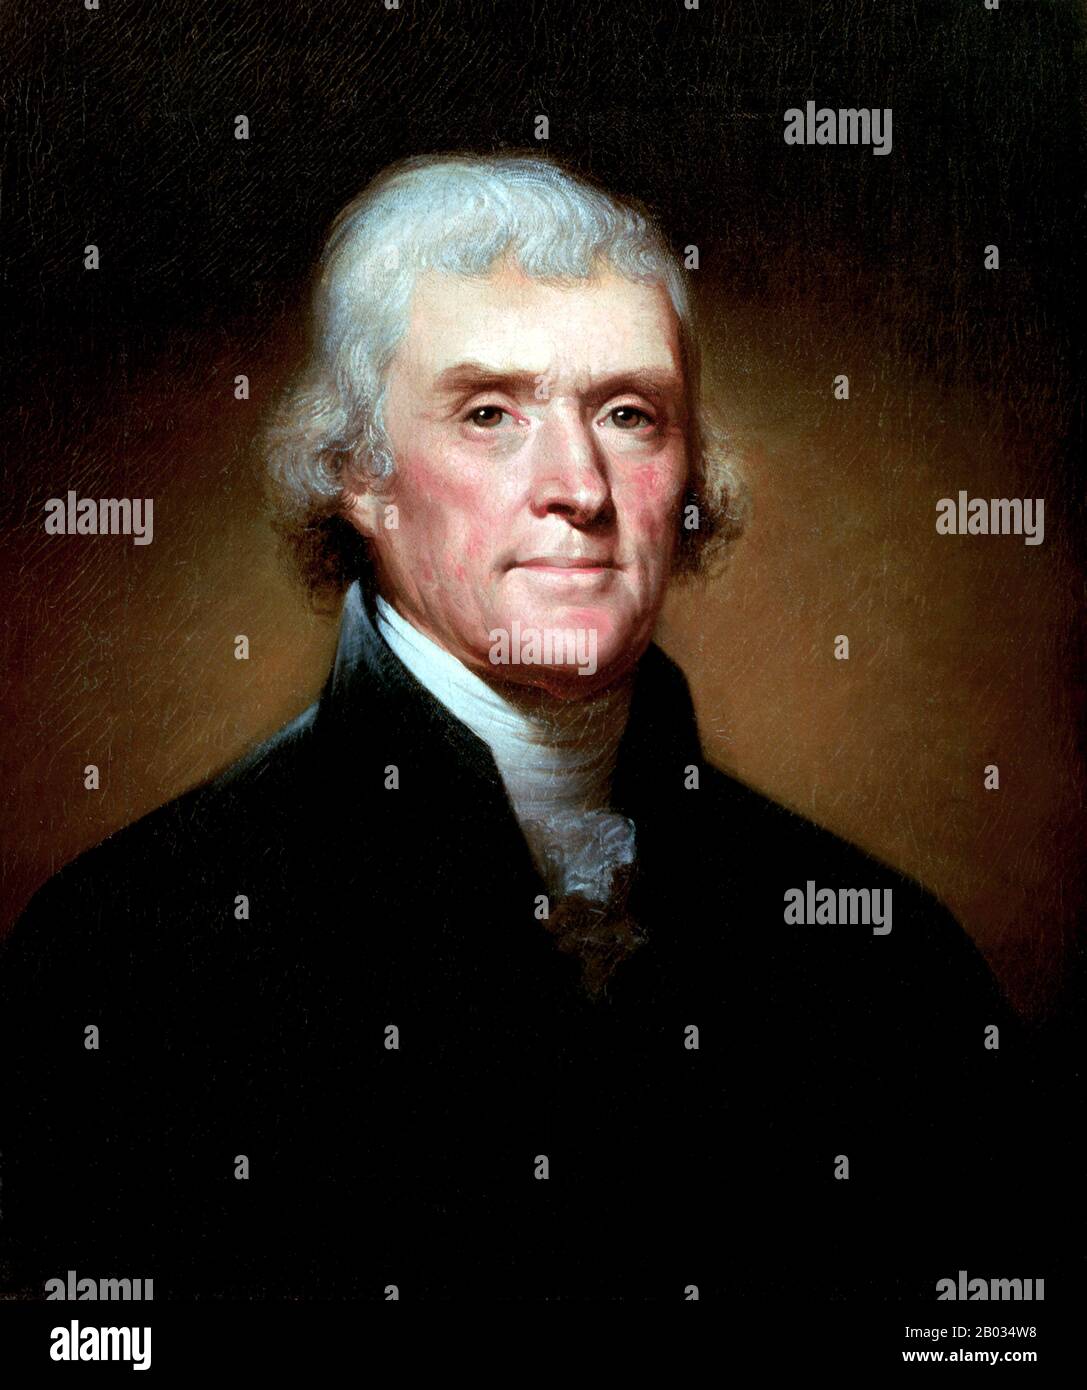 Thomas Jefferson (April 13, 1743 – July 4, 1826) was an American Founding Father and the principal author of the Declaration of Independence (1776). He was elected the second Vice President of the United States (1797–1801), serving under John Adams and in 1800 was elected the third President (1801–09).  Jefferson was a proponent of democracy, republicanism, and individual rights, which motivated American colonists to break from Great Britain and form a new nation. He produced formative documents and decisions at both the state and national level. Stock Photo